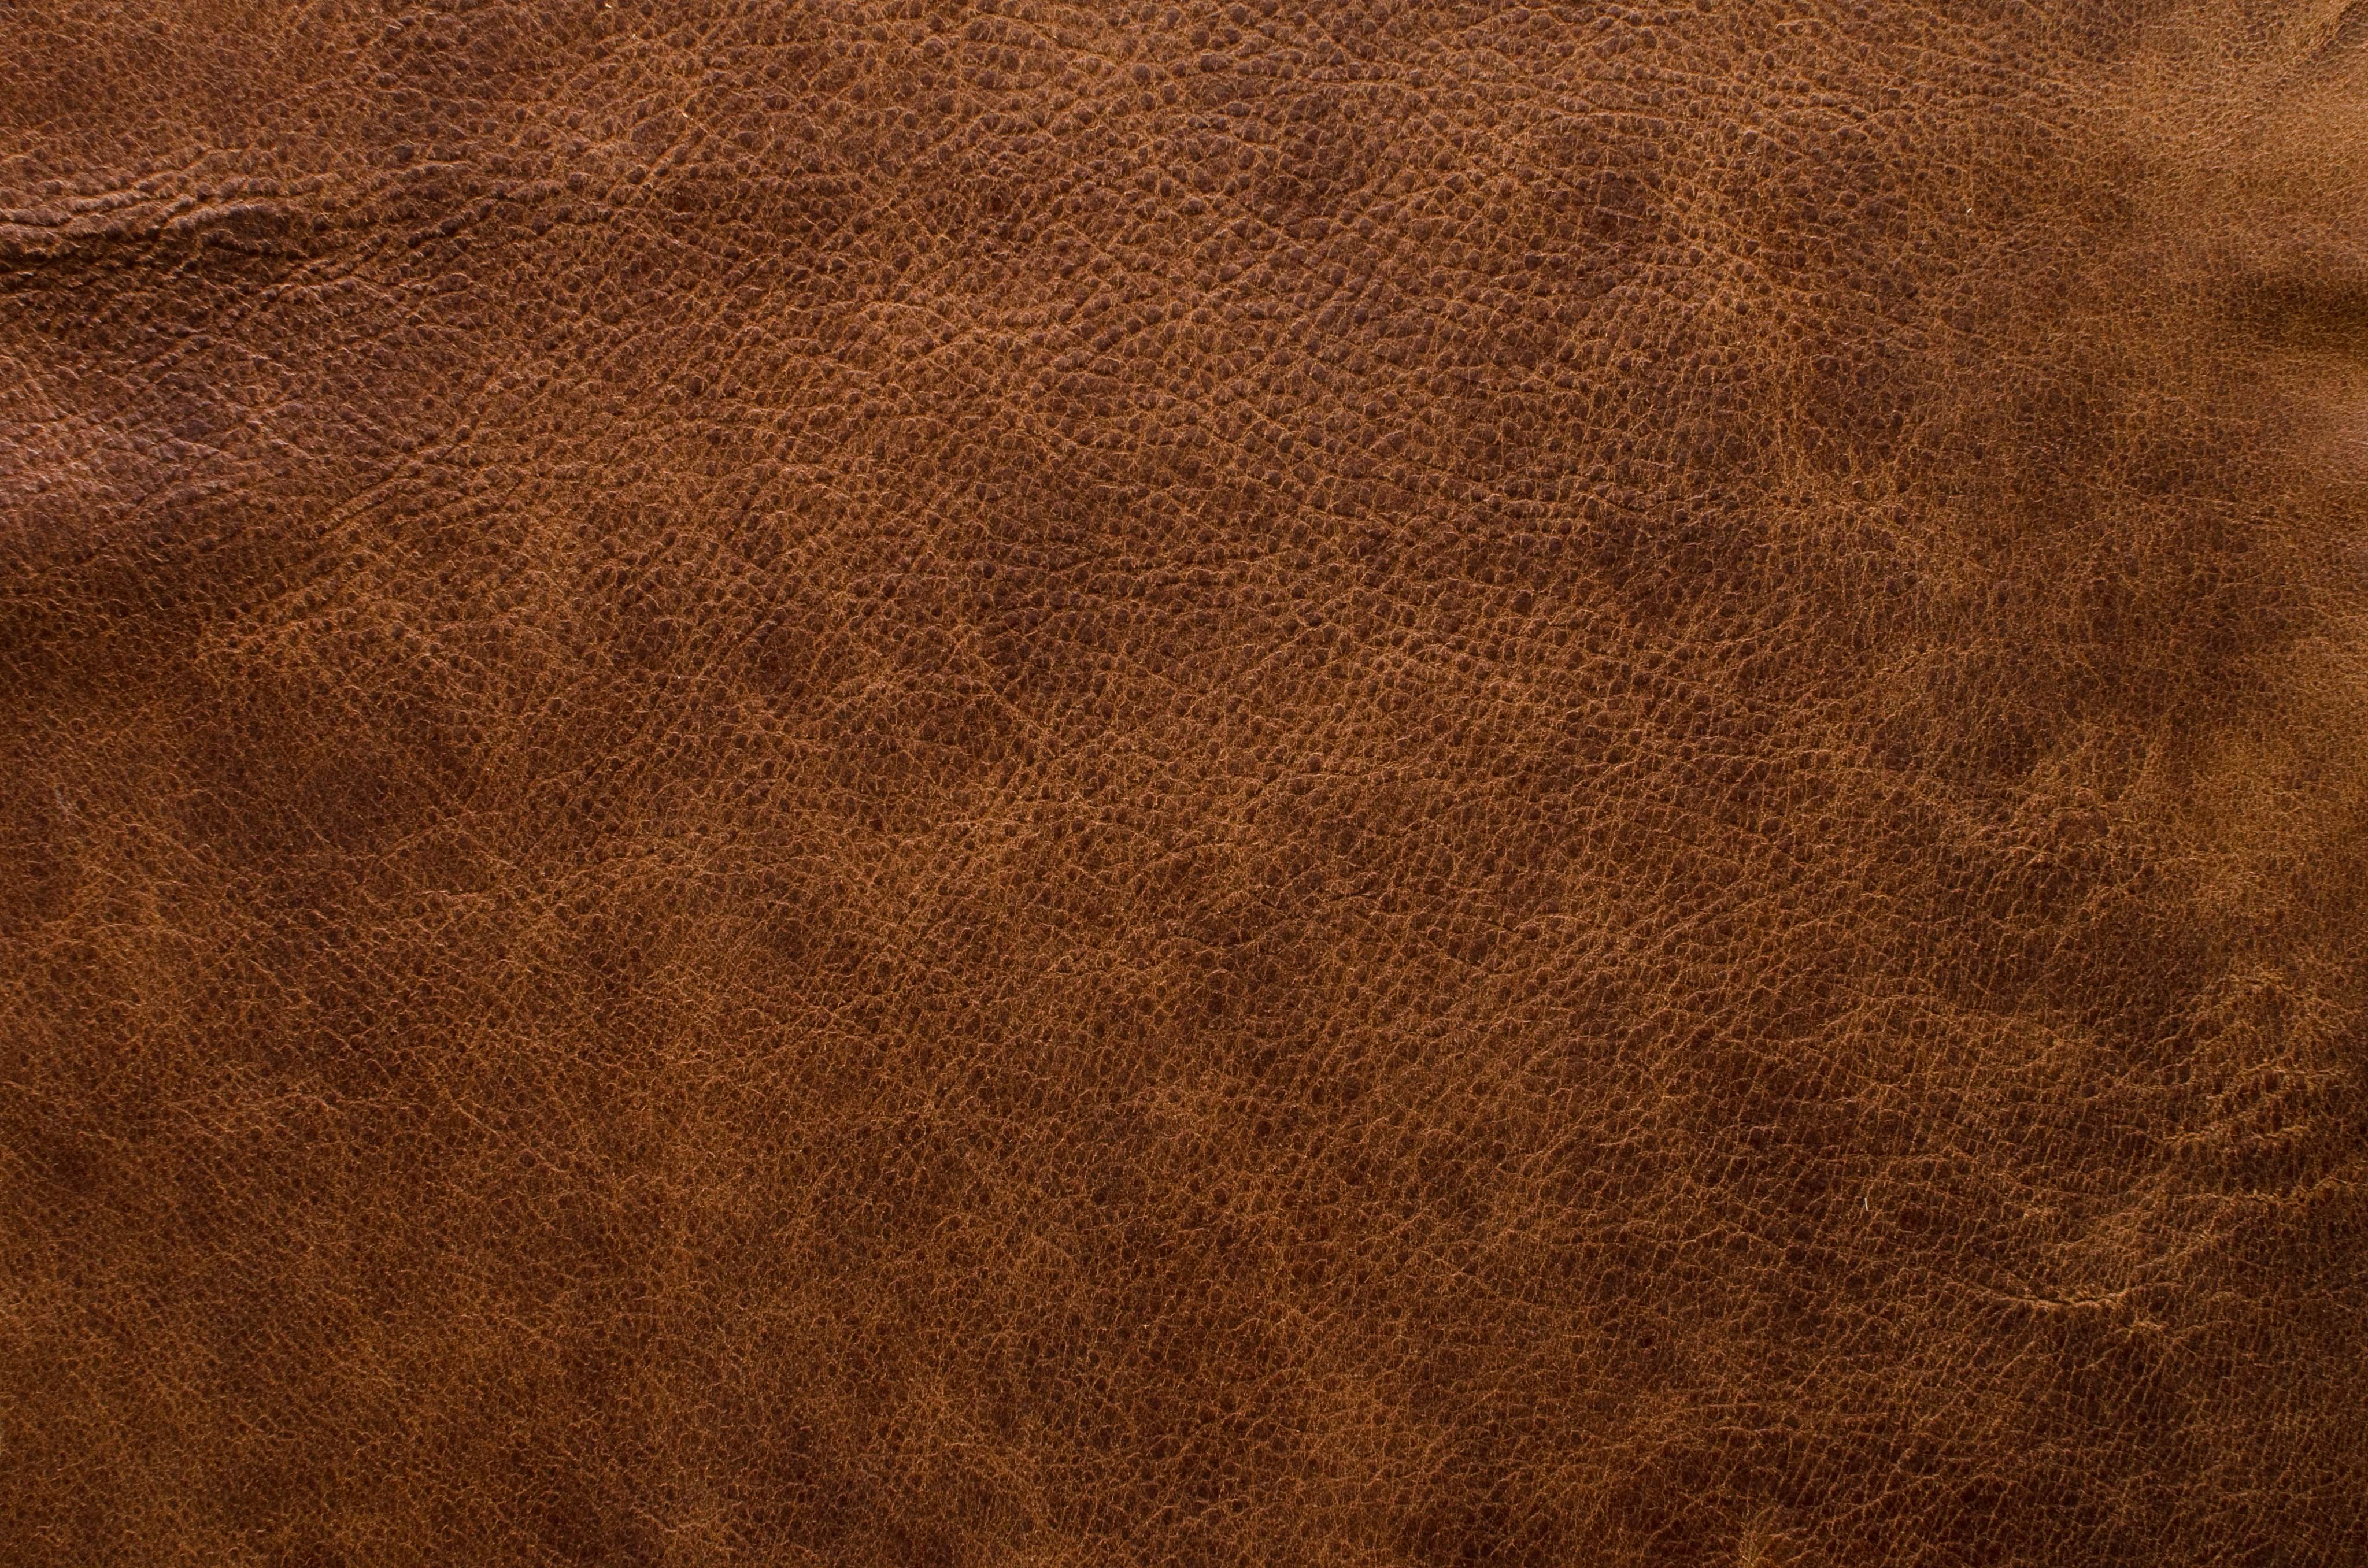 Related image with Brown Leather Texture